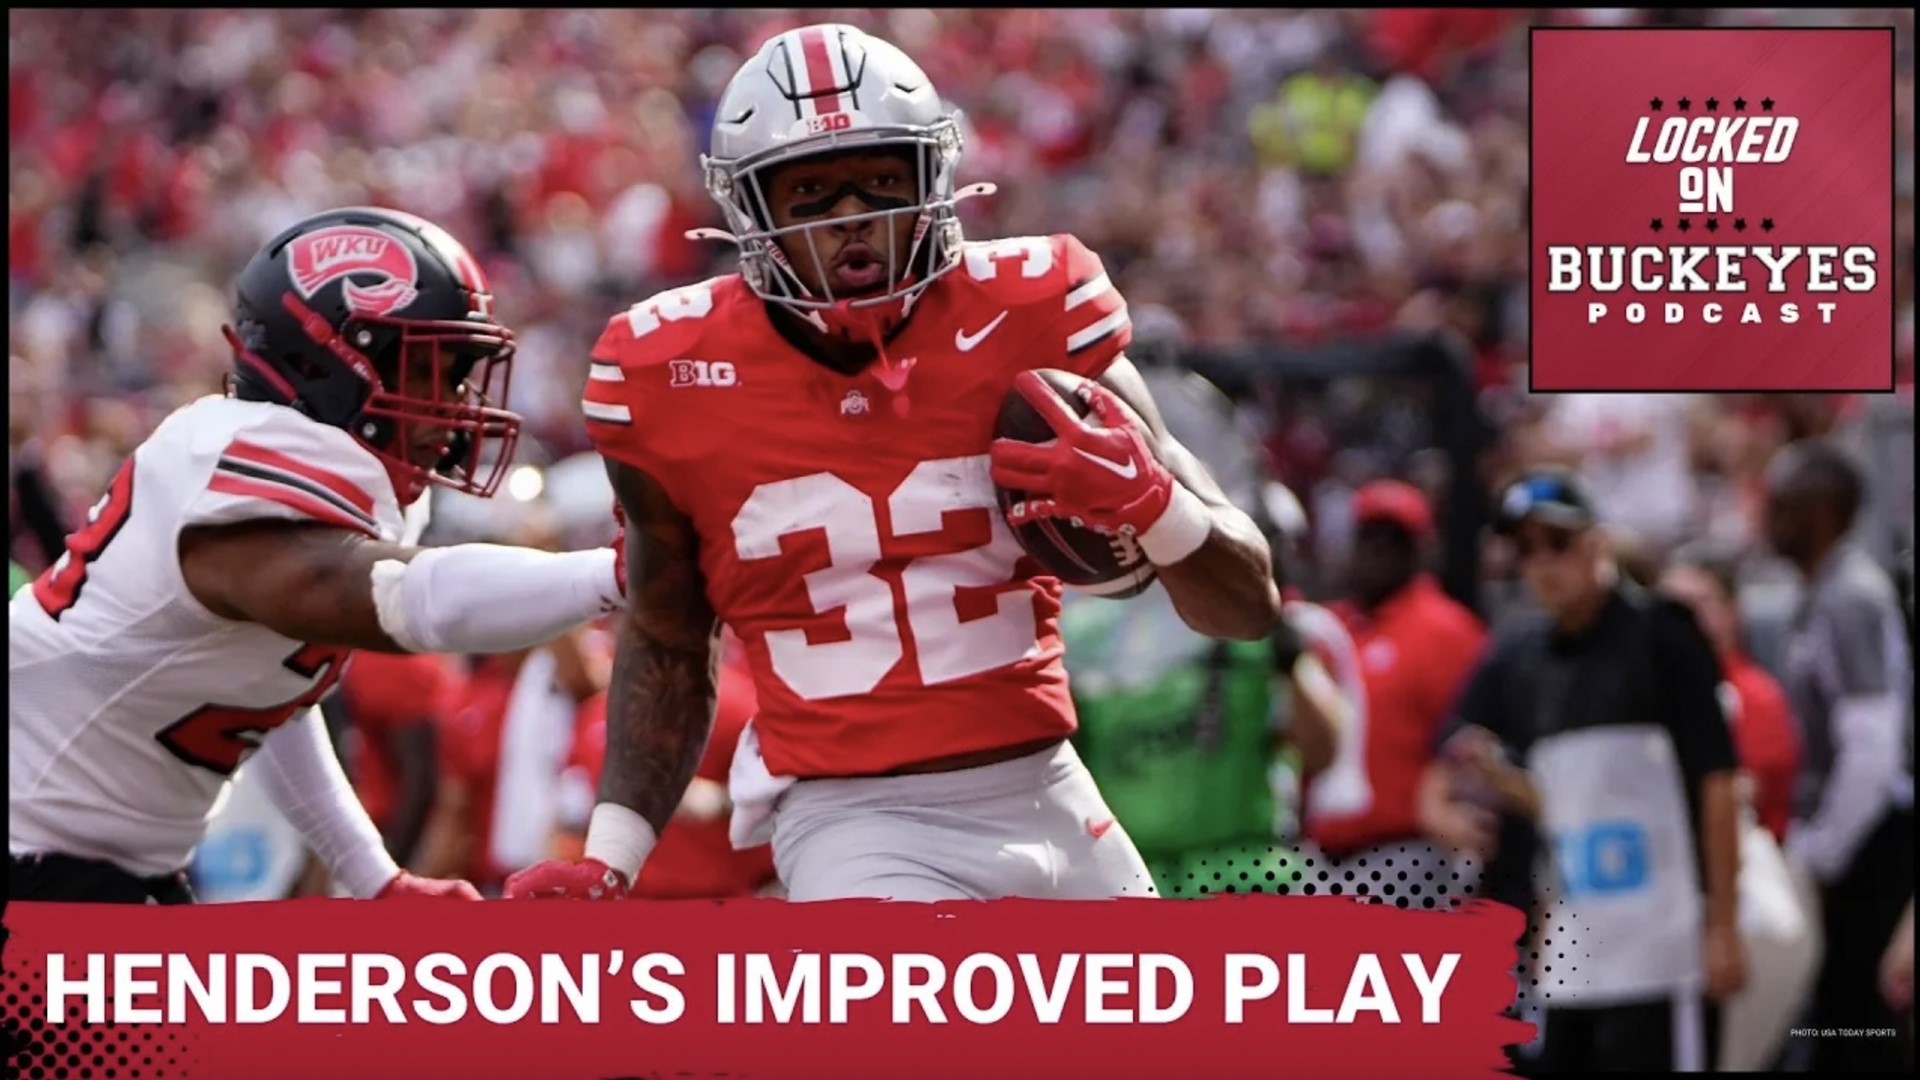 While rewatching the Buckeyes win over Western Kentucky, Jay Stephens was impressed with the Buckeyes running game.